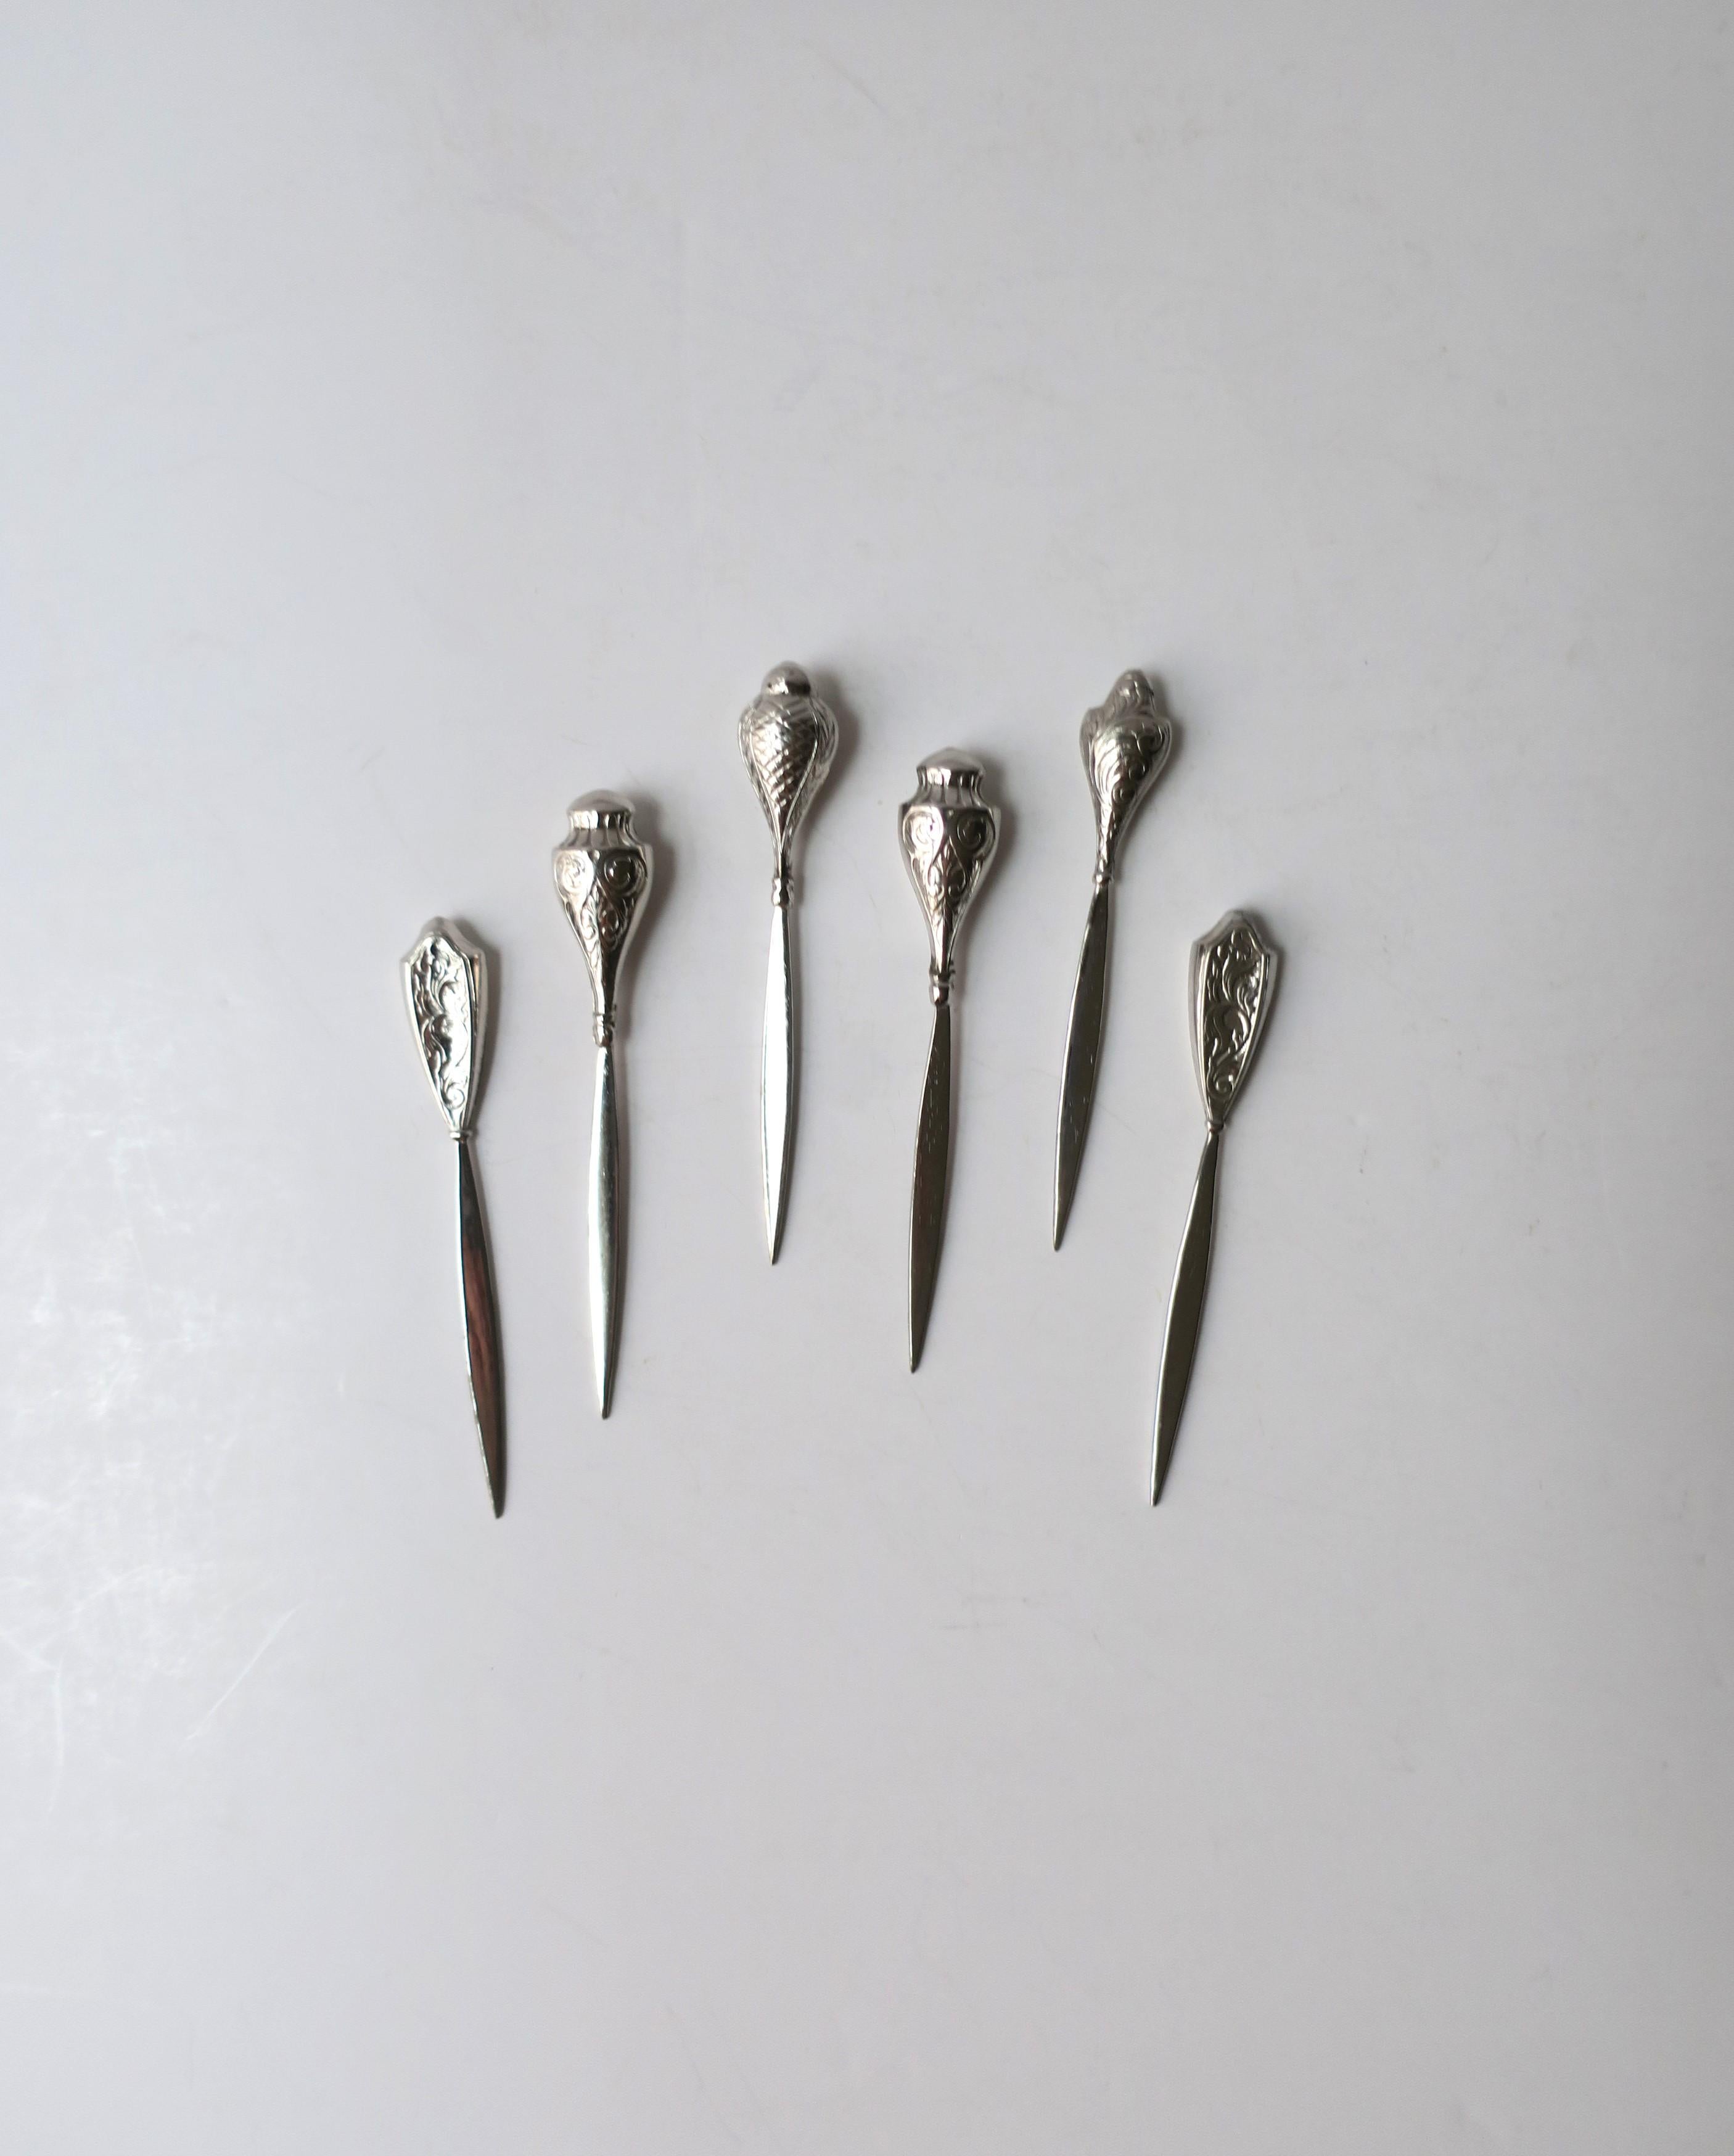 A beautiful set of six (6) sterling silver cocktail or appetizer picks, circa early to mid-20th century, USA. A great set for a bar, bar cart, entertaining, etc. Each are stamped 'Sterling' on blade, please see last image. Excellent condition as